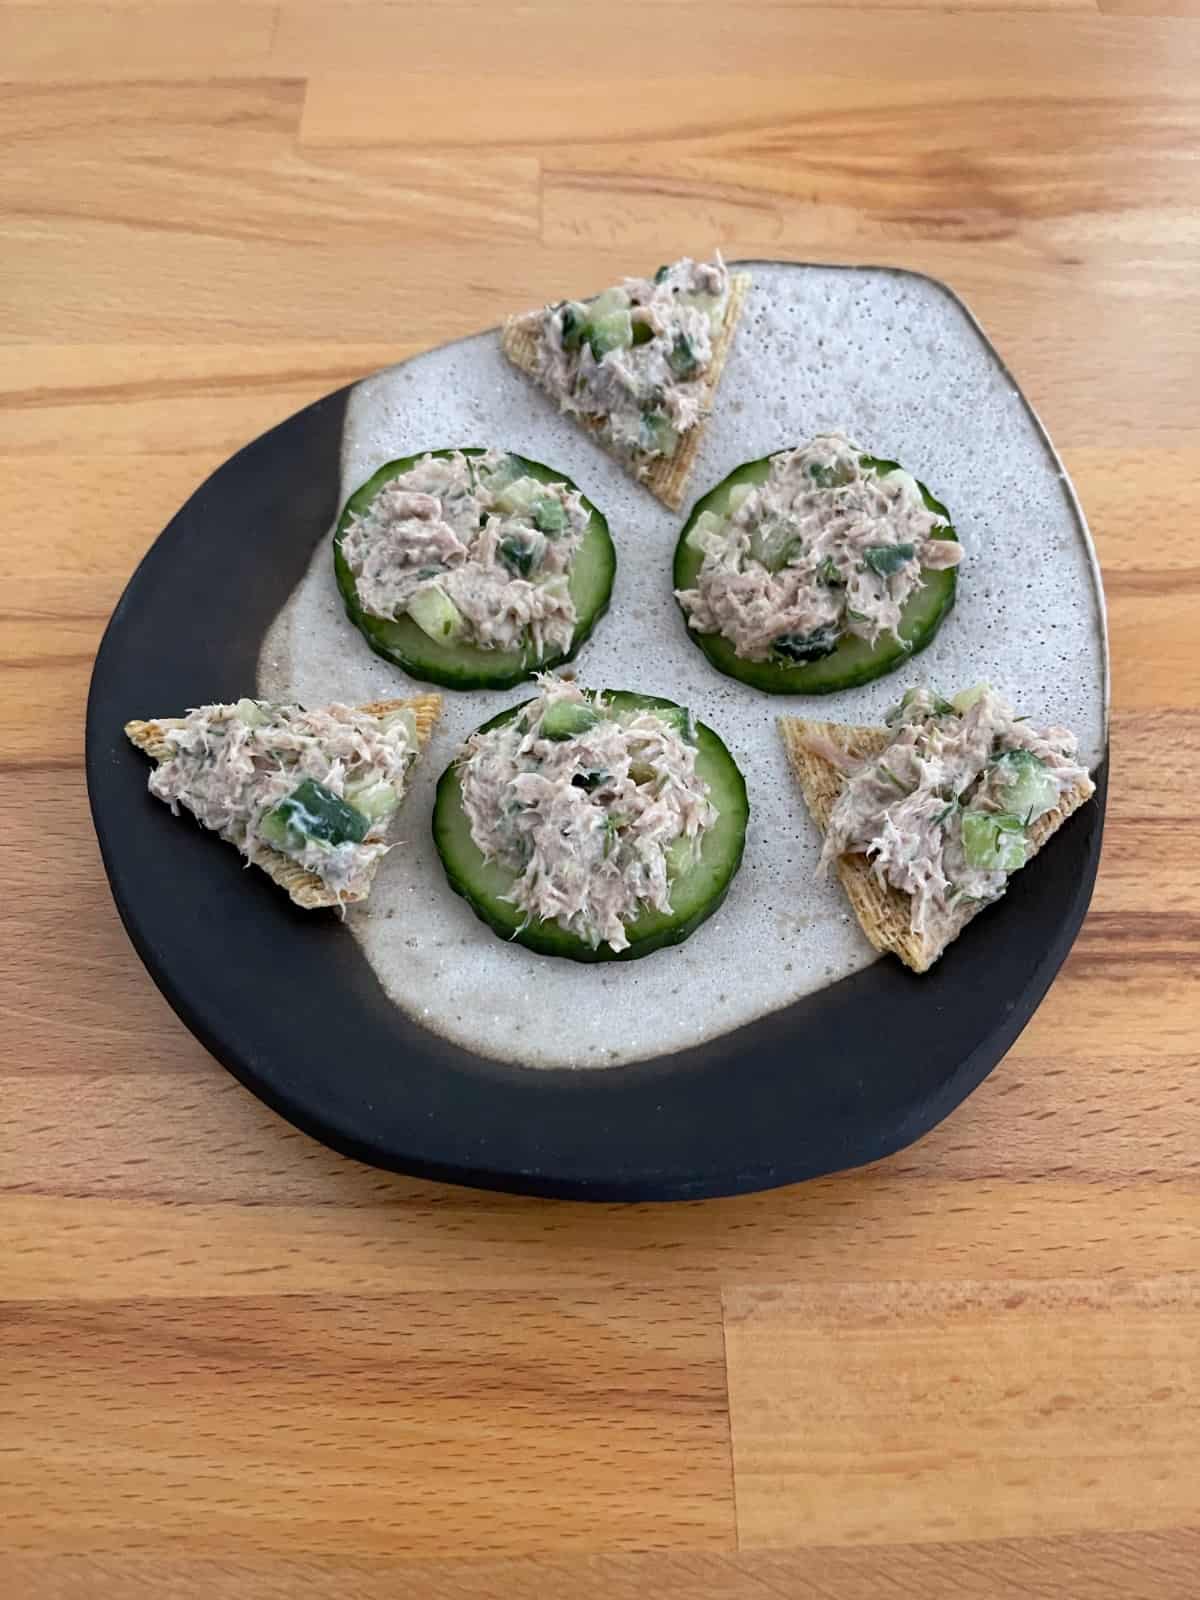 Dilly tuna spread on cucumber slices and Triscuit thin crisps on ceramic plate.